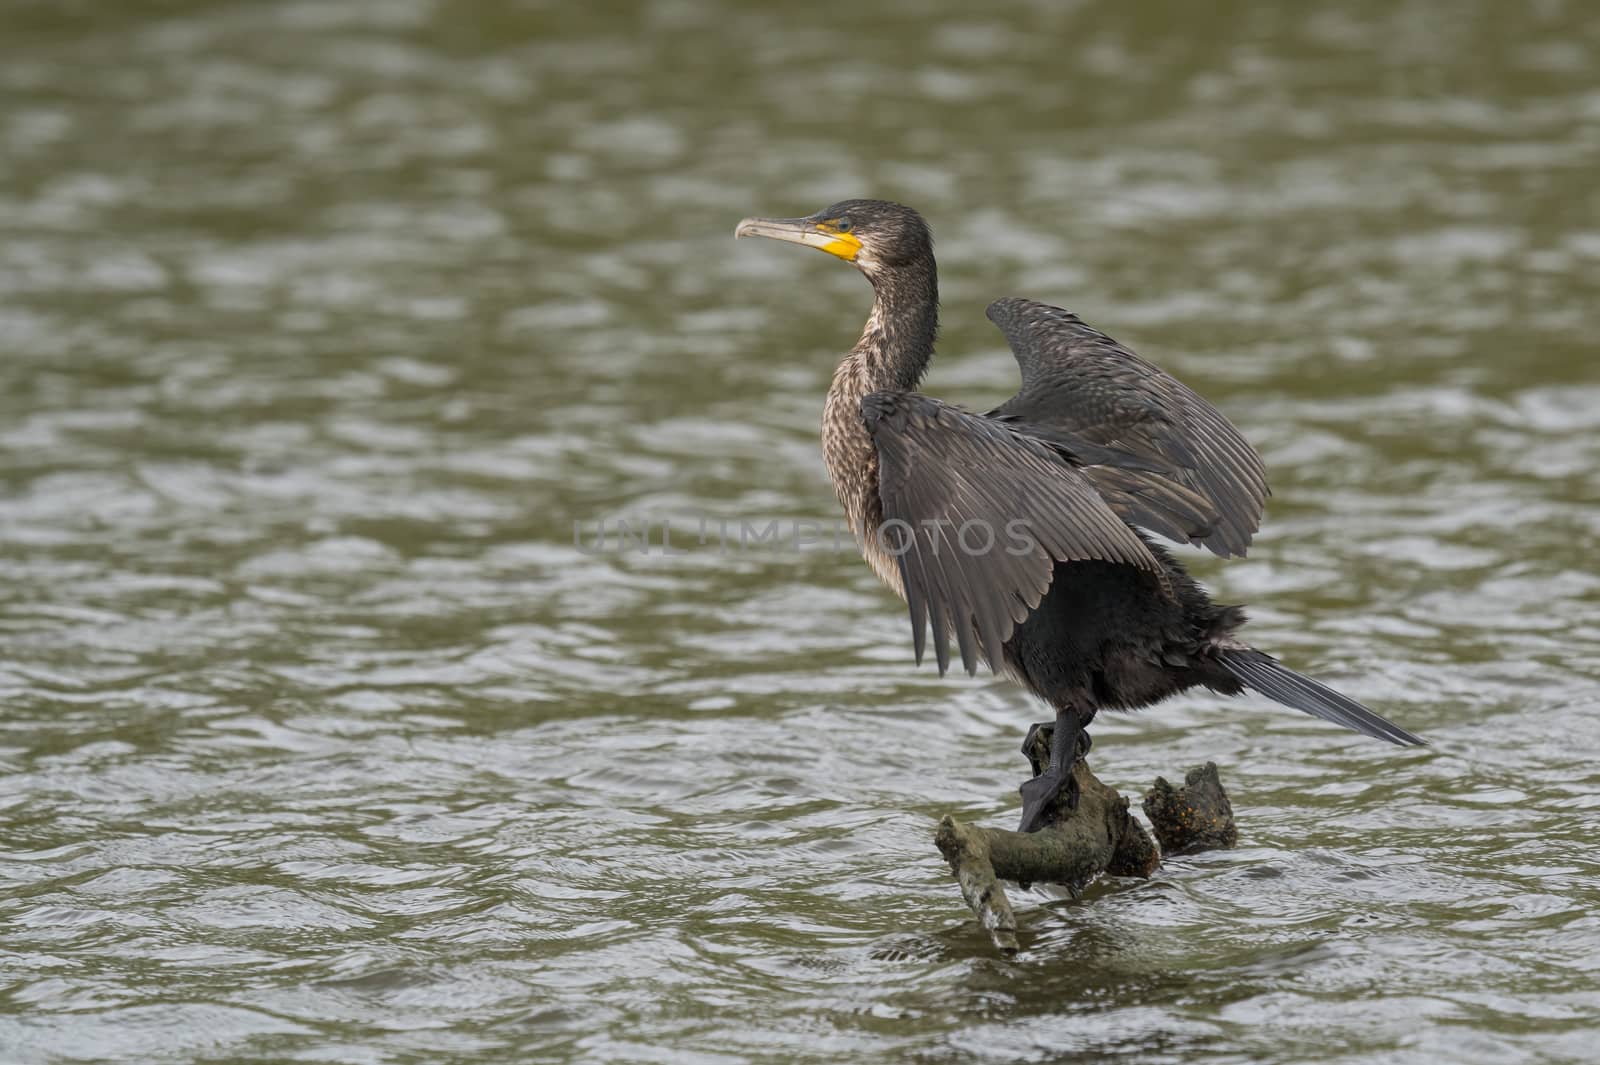 great black cormorant drying its plumage after fishing